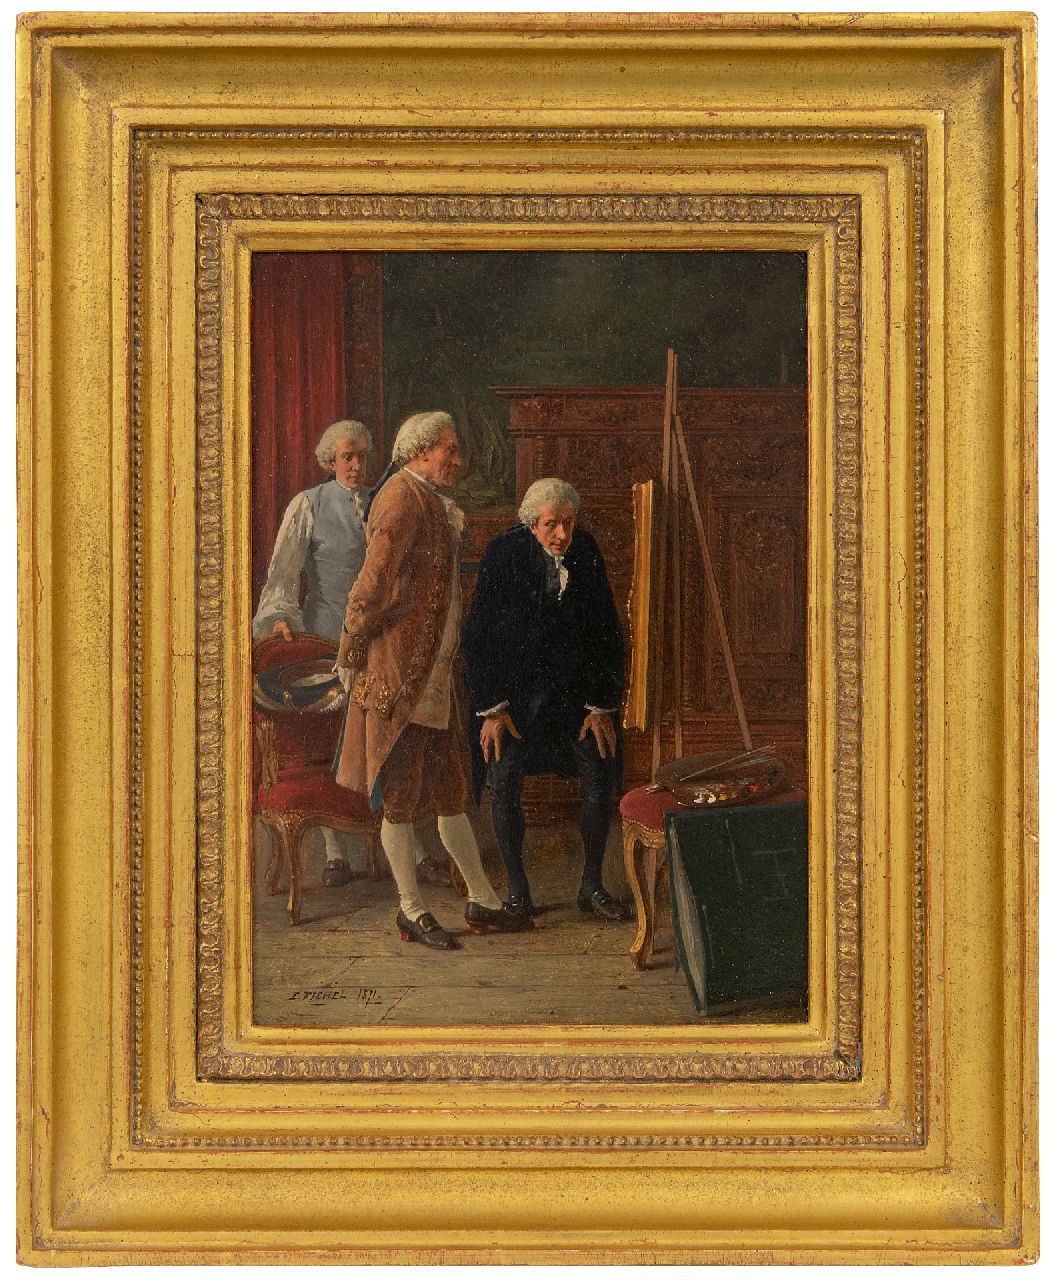 Fichel B.E.  | Benjamin 'Eugène' Fichel | Paintings offered for sale | The Connoisseur, oil on panel 21.8 x 15.8 cm, signed l.l. and dated 1871